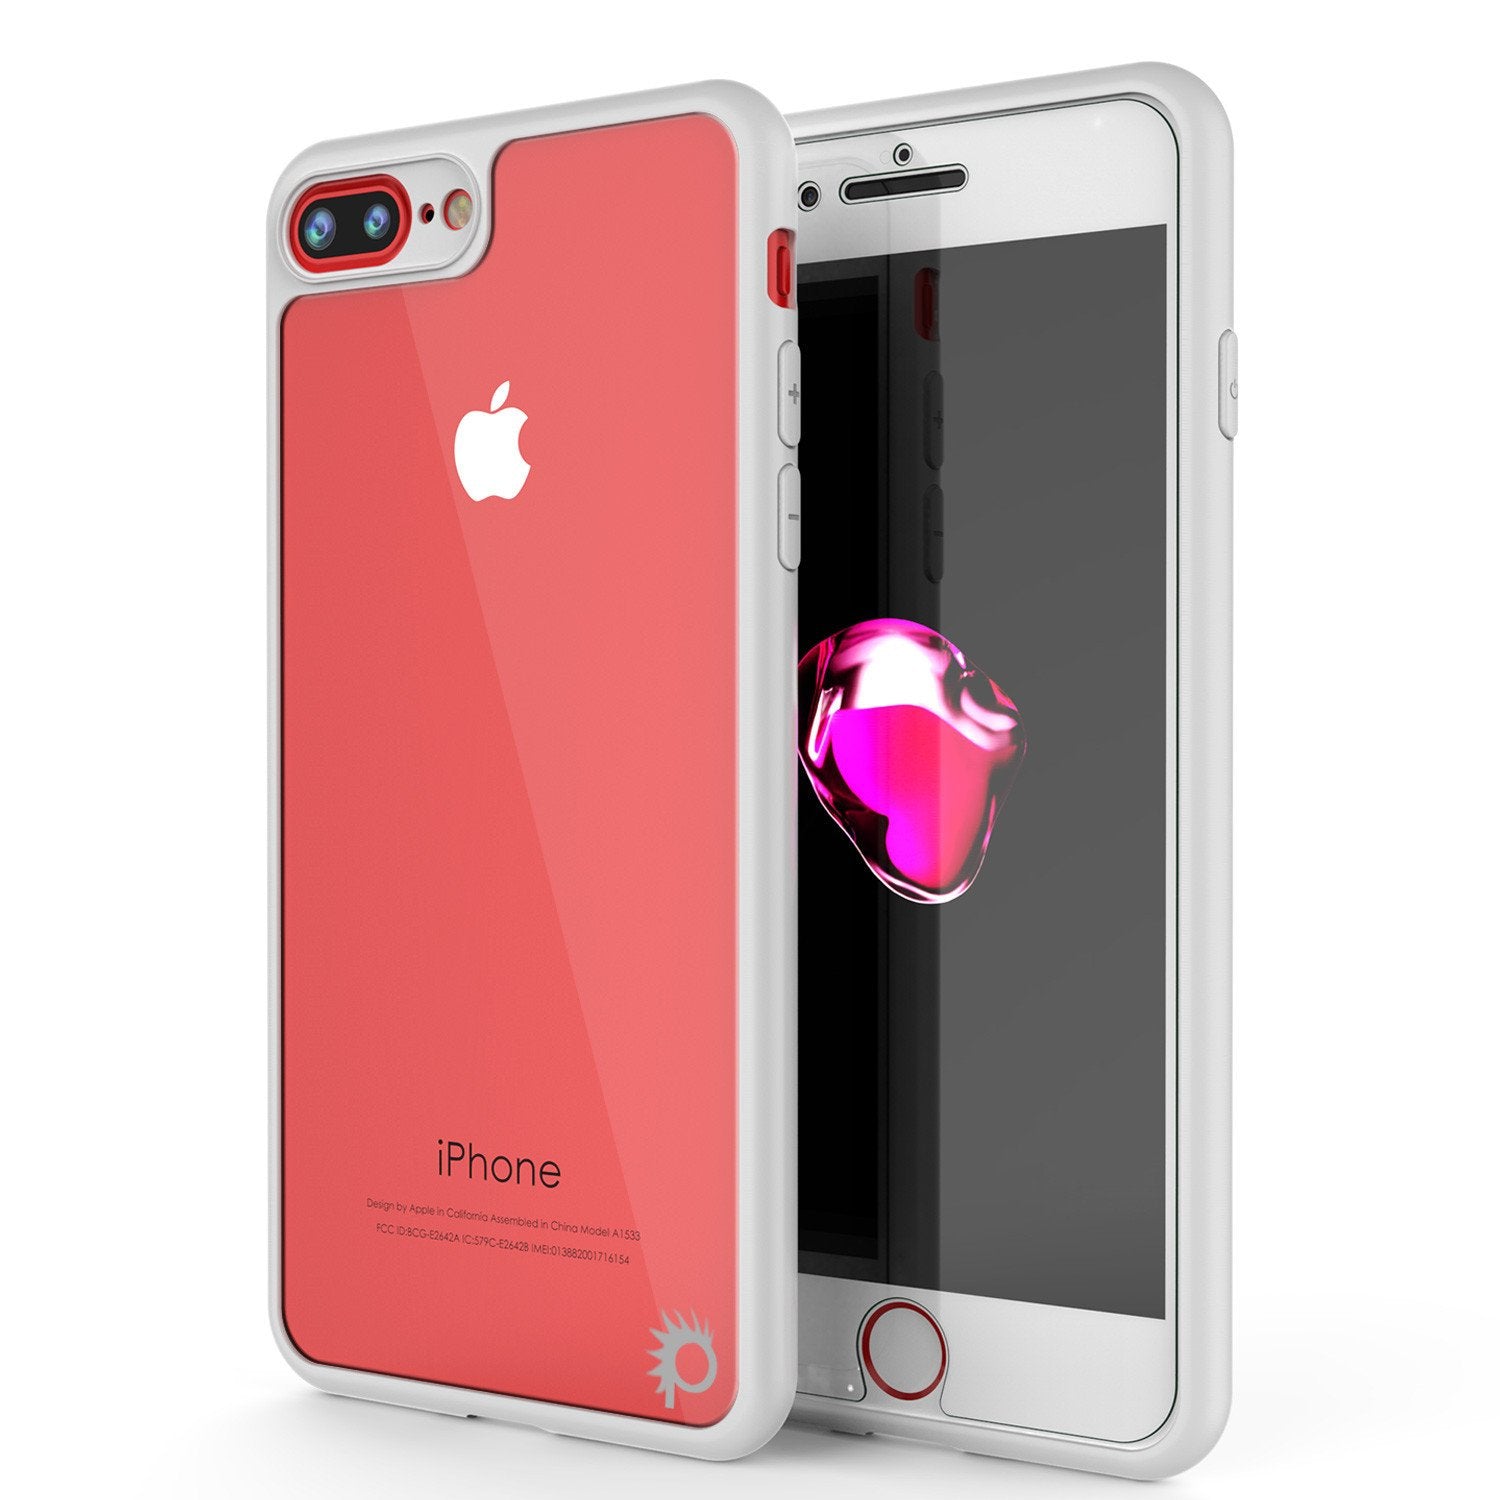 iPhone 7 PLUS Case, Punkcase MASK Series Ultra Thin Cover [WHITE]